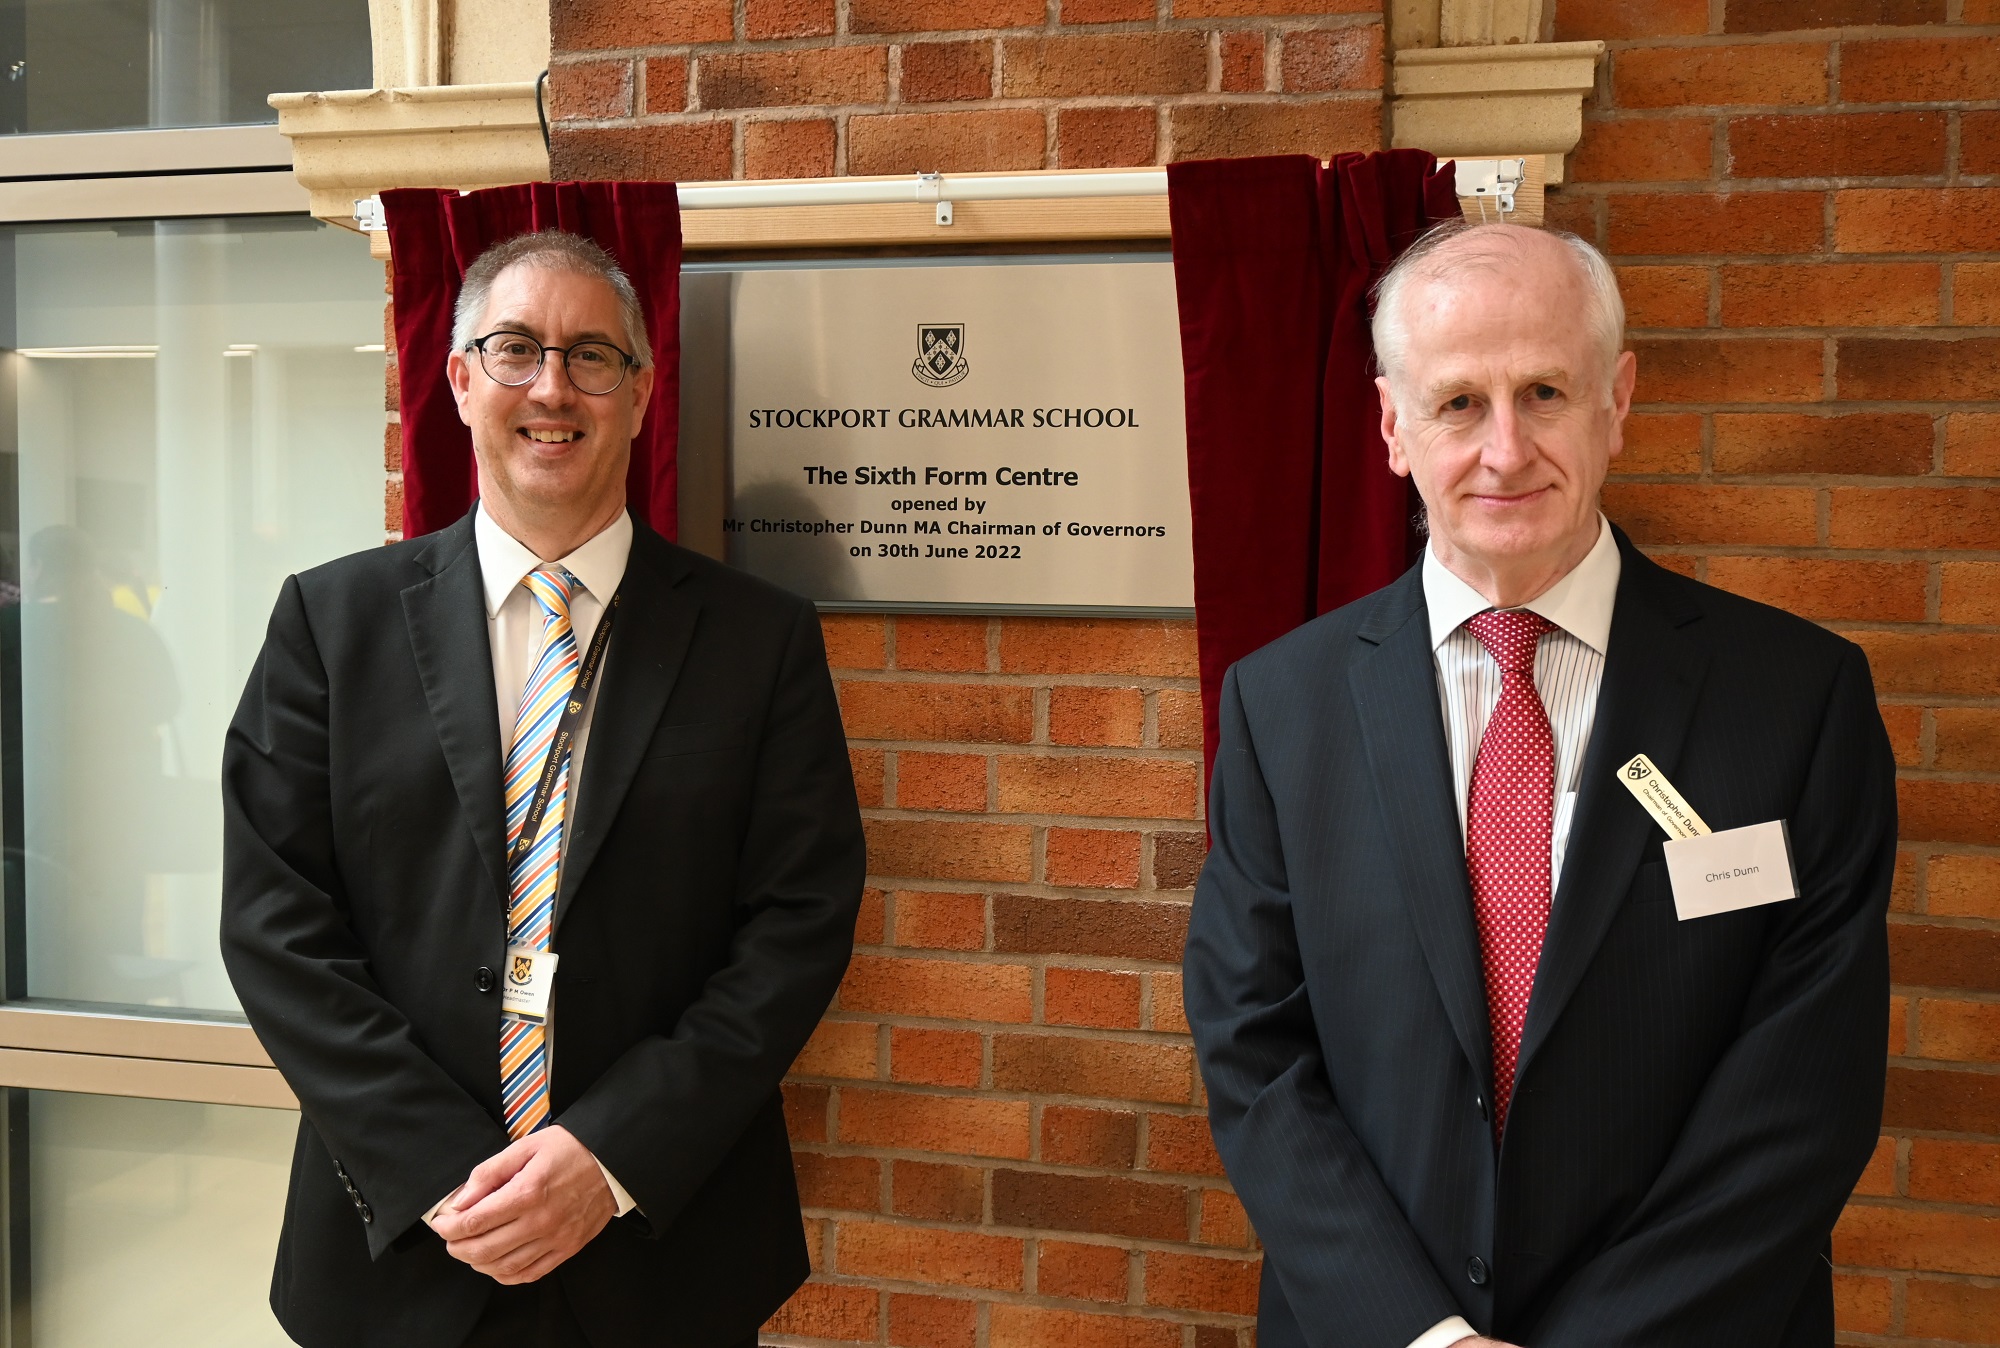 The official opening of the Sixth Form Centre